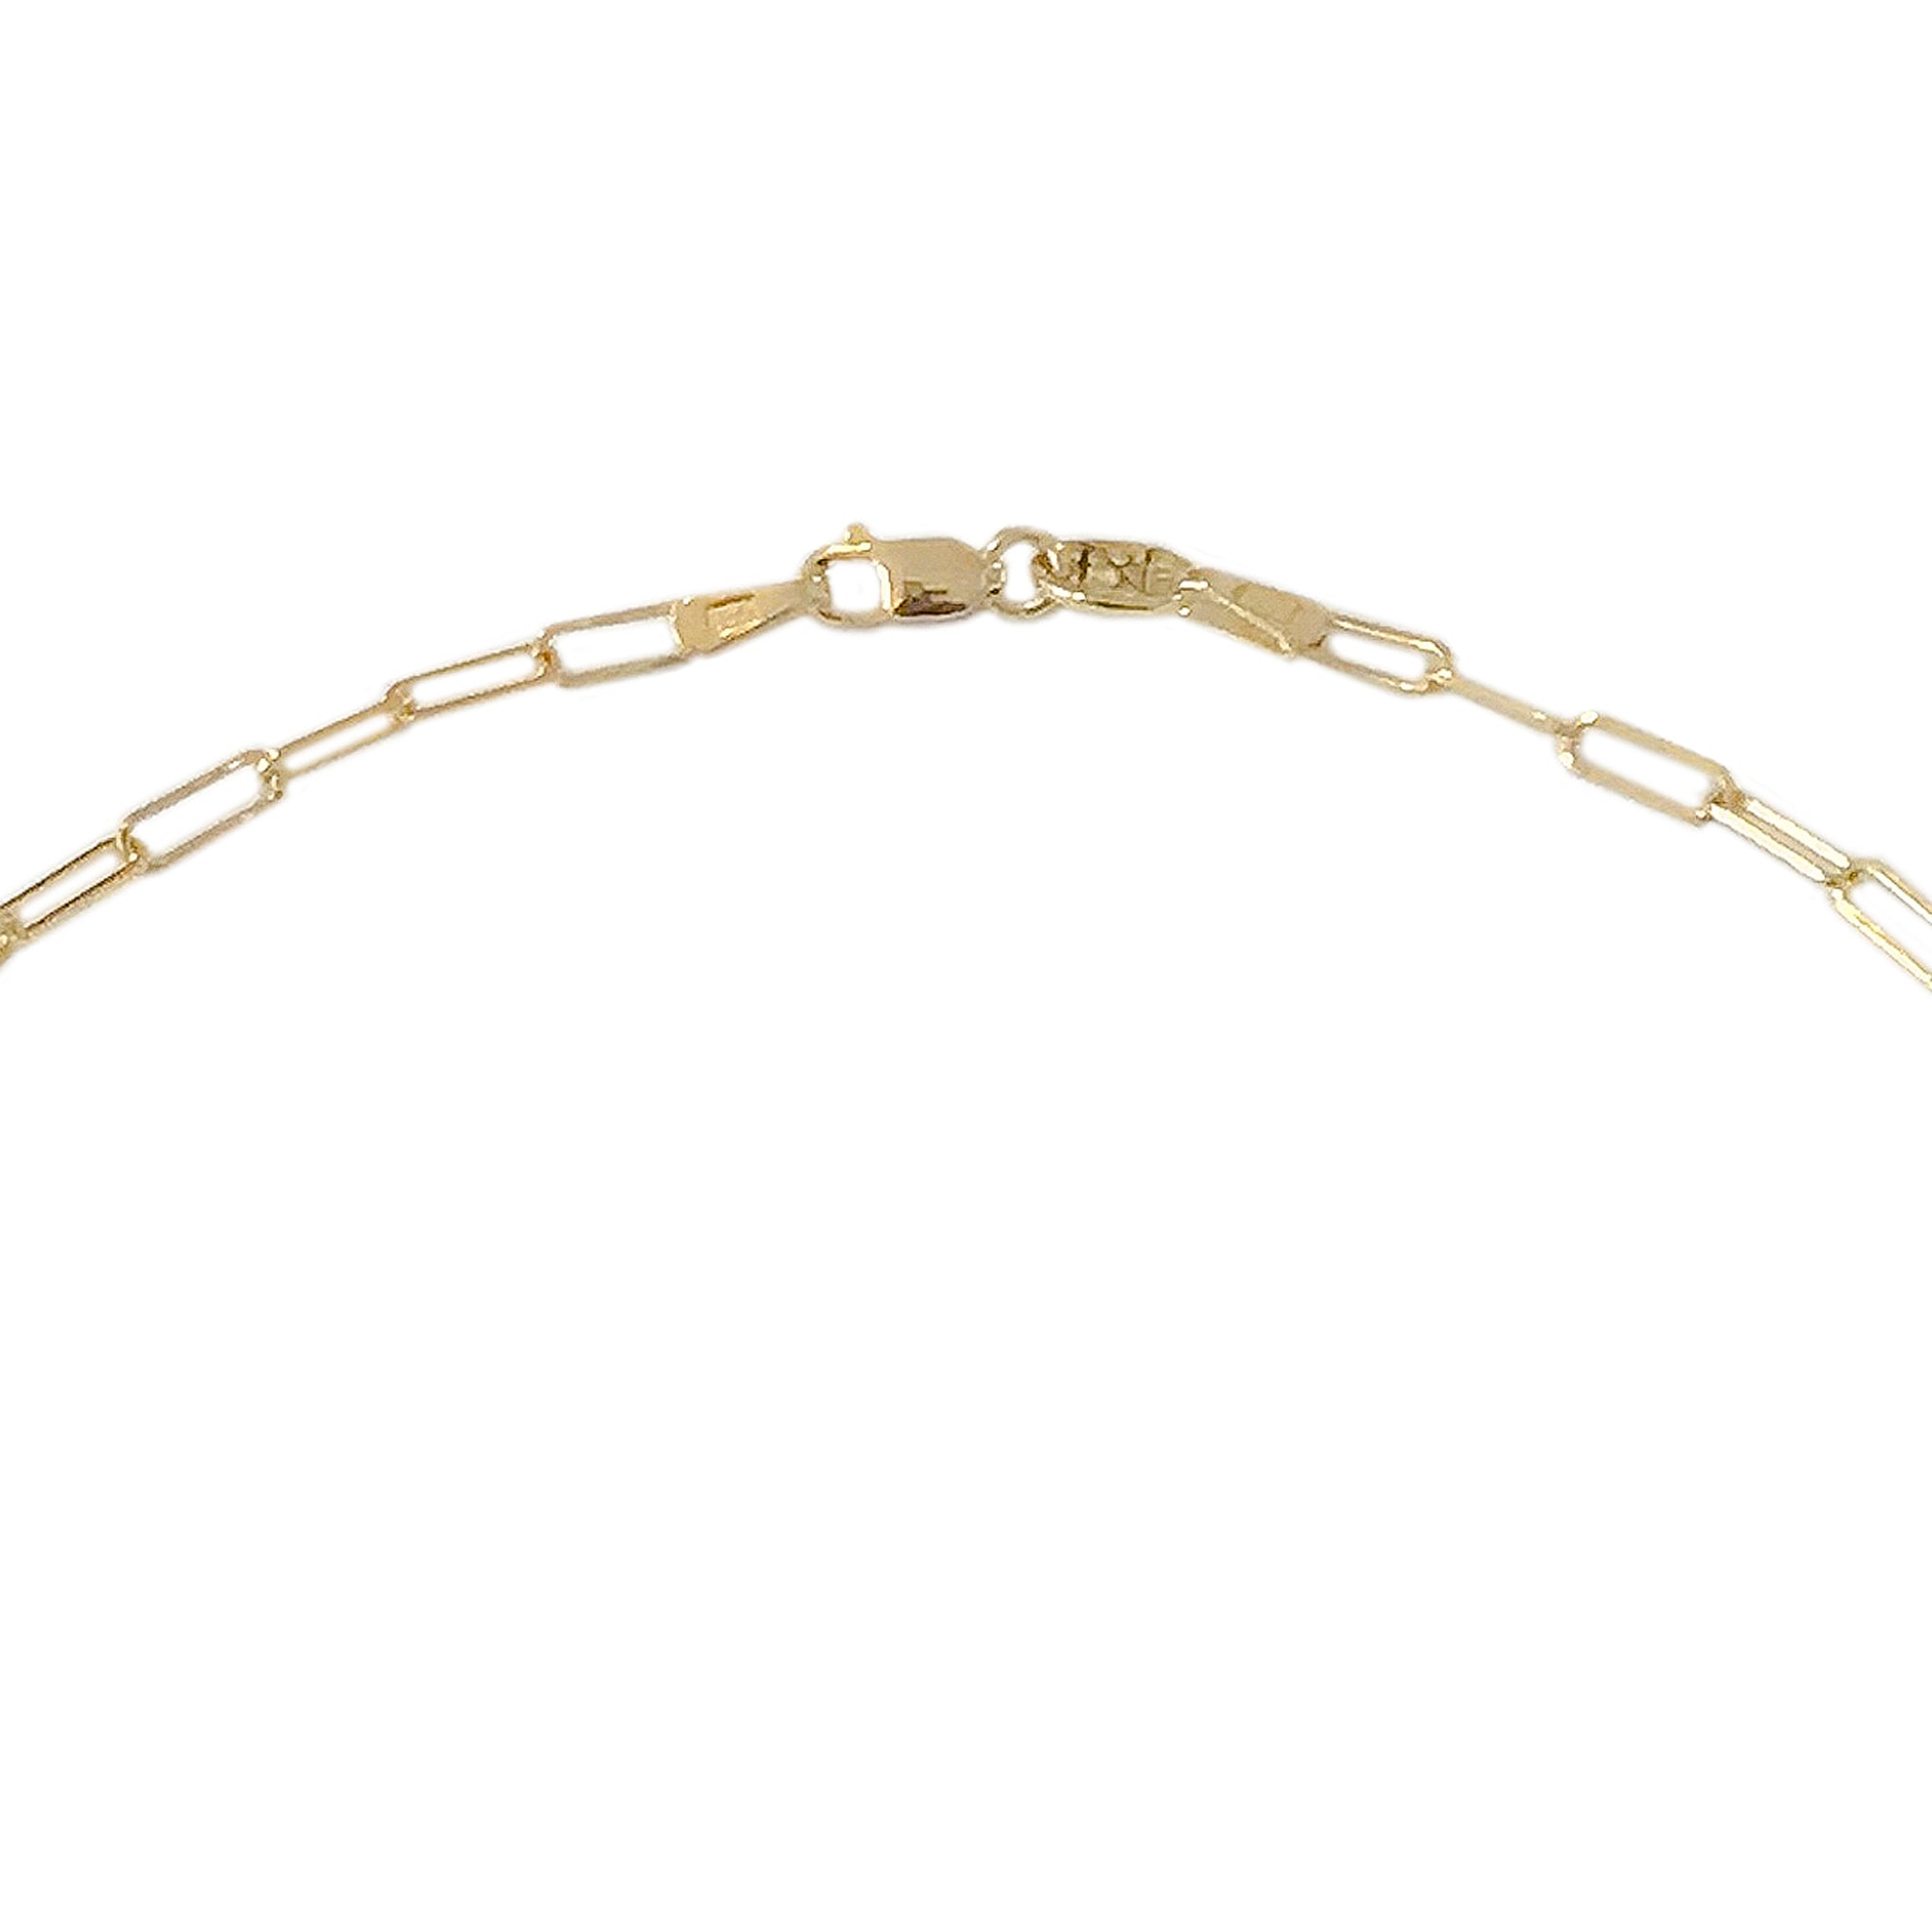 14K Gold Thin Elongated Oval Link Chain Necklace, Small Size Link